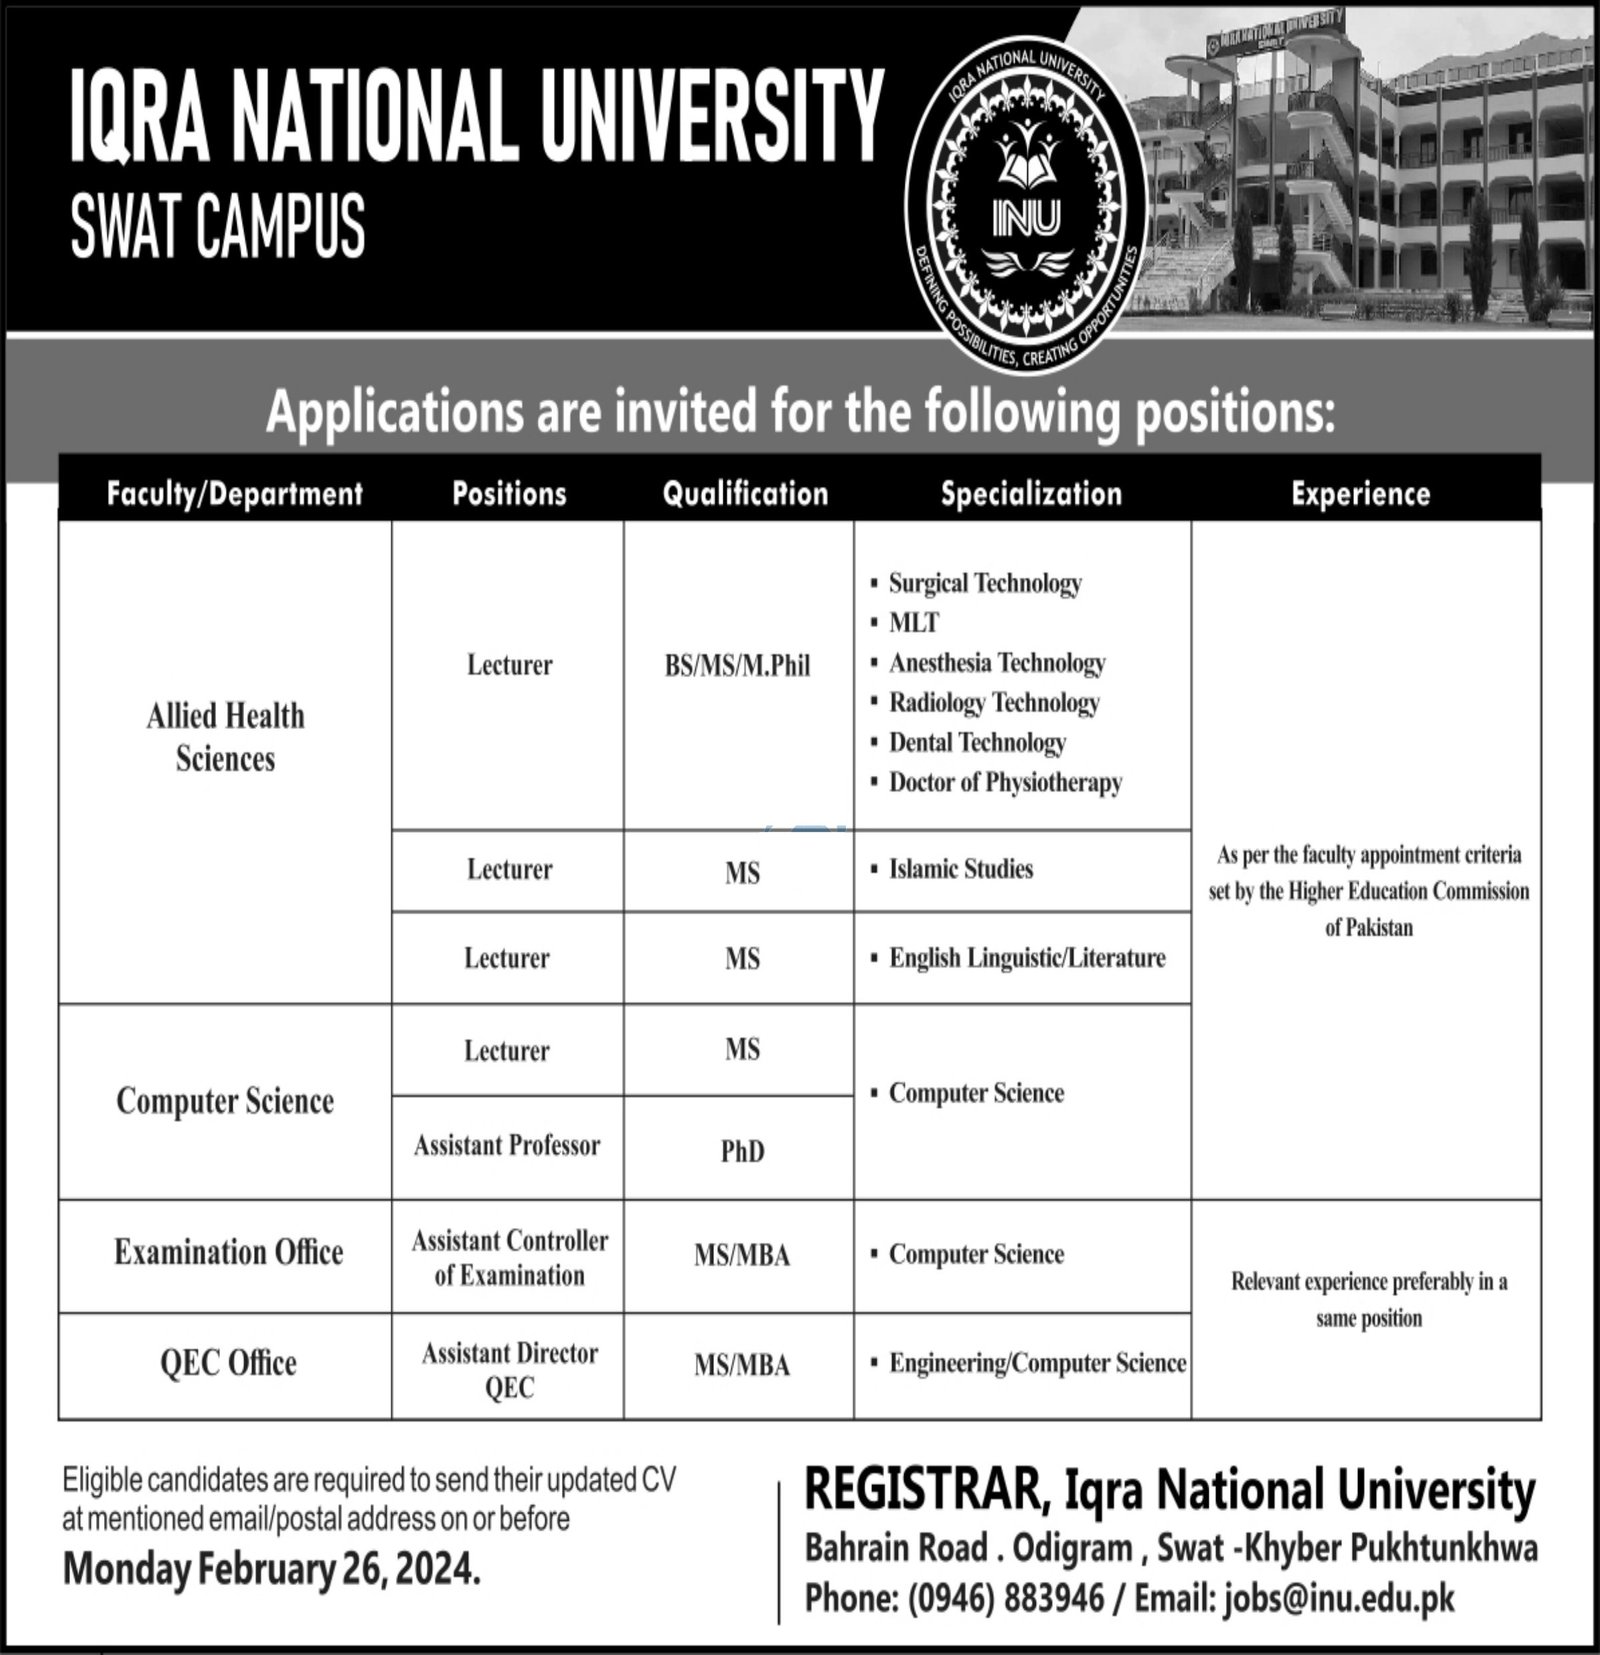 Iqra National University Swat Campus seeks qualified applicants for Lecturer, Assistant Professor, and other positions in Allied Health Sciences, Computer Science, Examination & QEC Offices. Apply by Feb 26th! Teaching jobs in Swat KPK